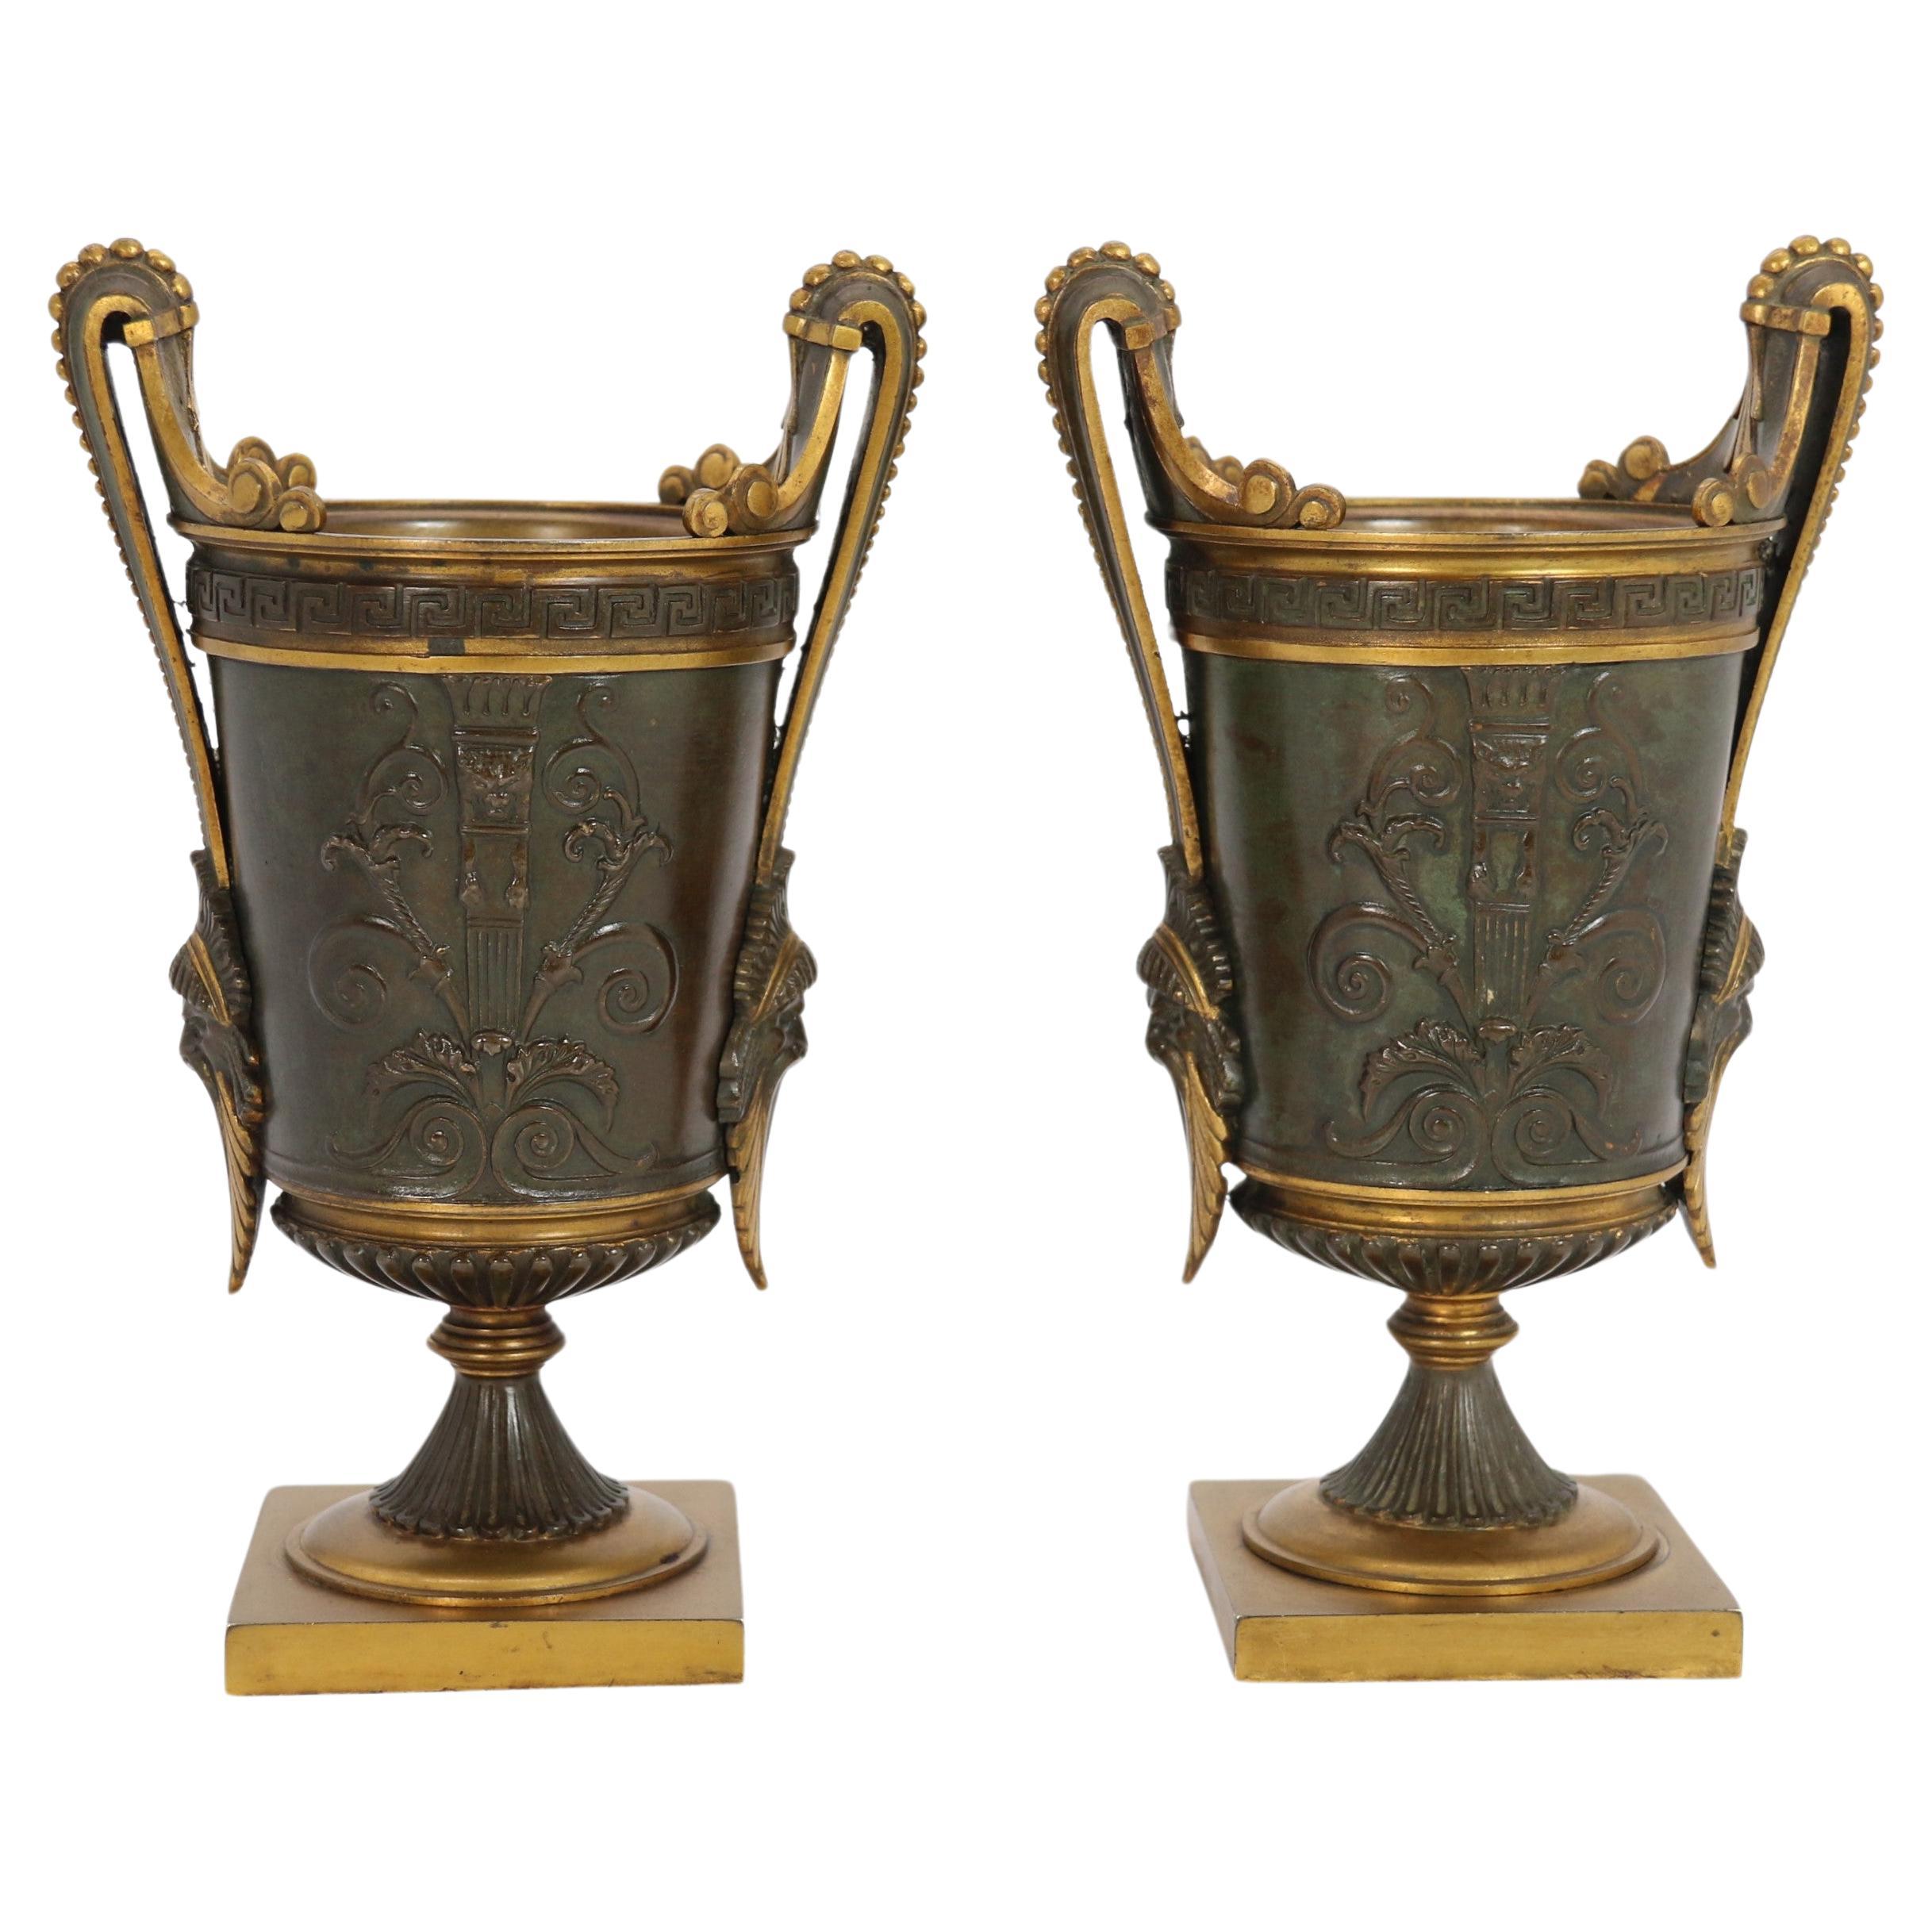 Empire period bronze and ormolu Grecian style pair of classical urns, circa 1830